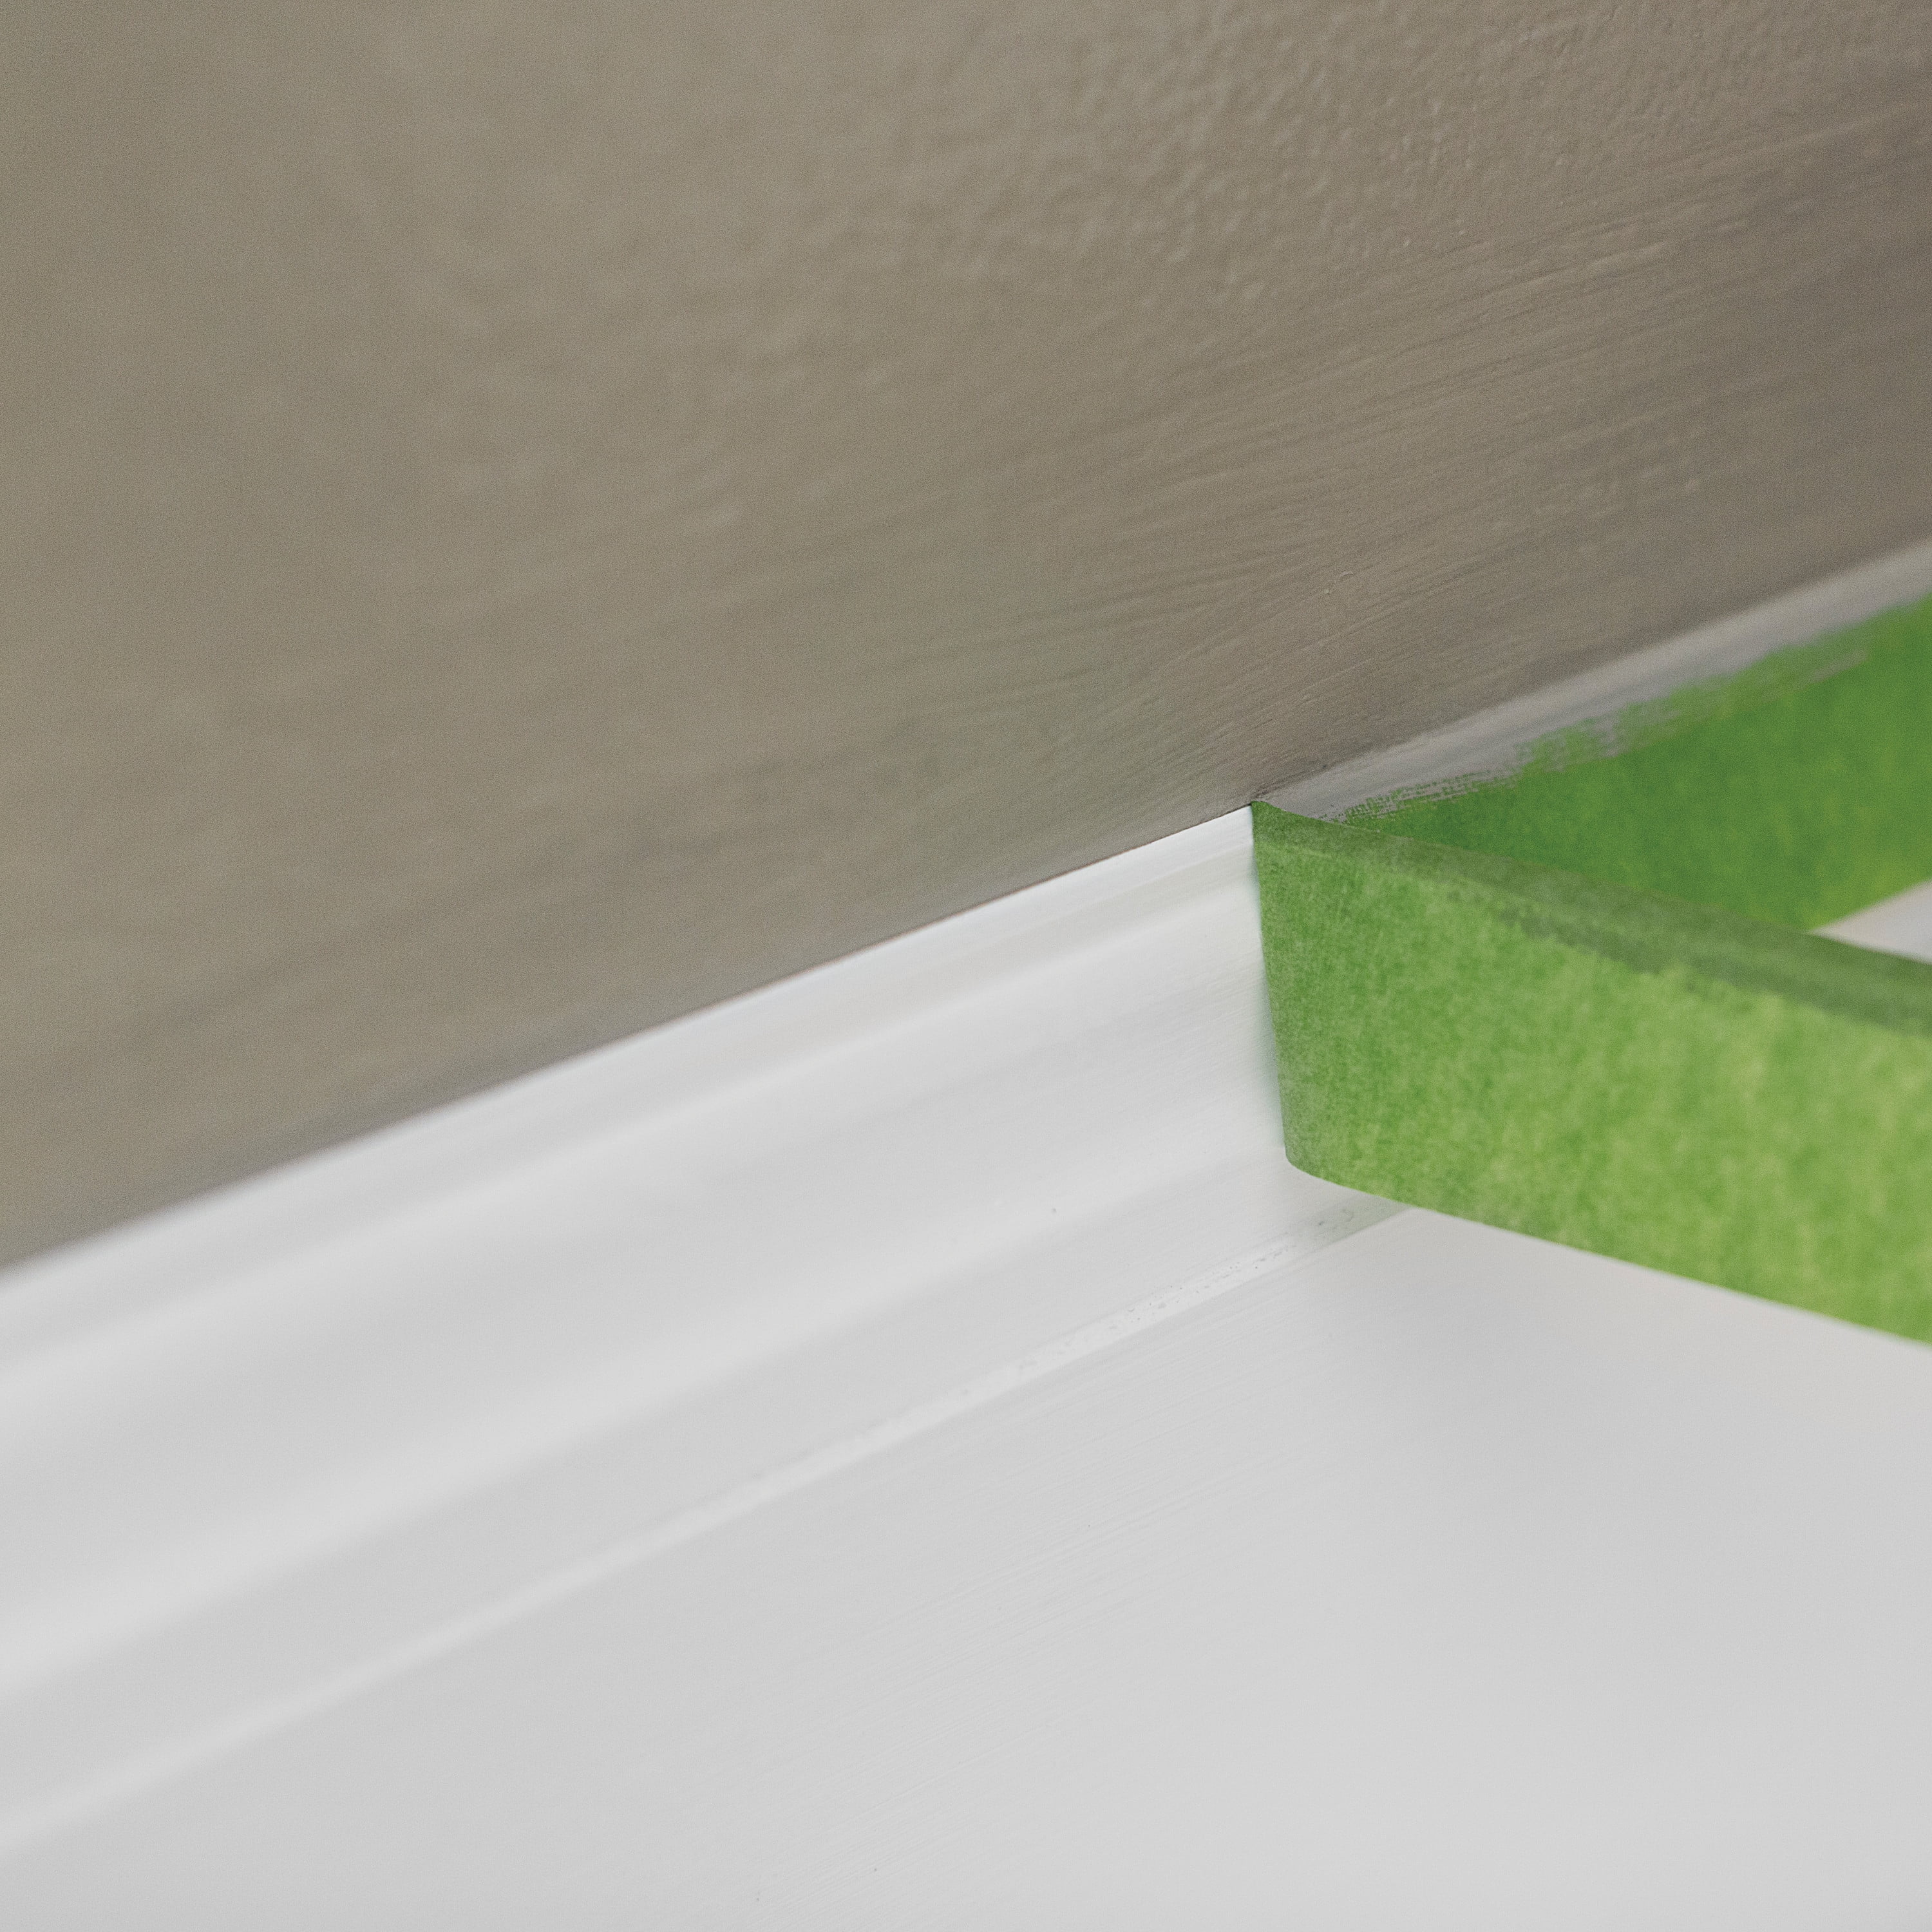 Does It Really Work? Green Frog Tape For Painting - CBS Minnesota